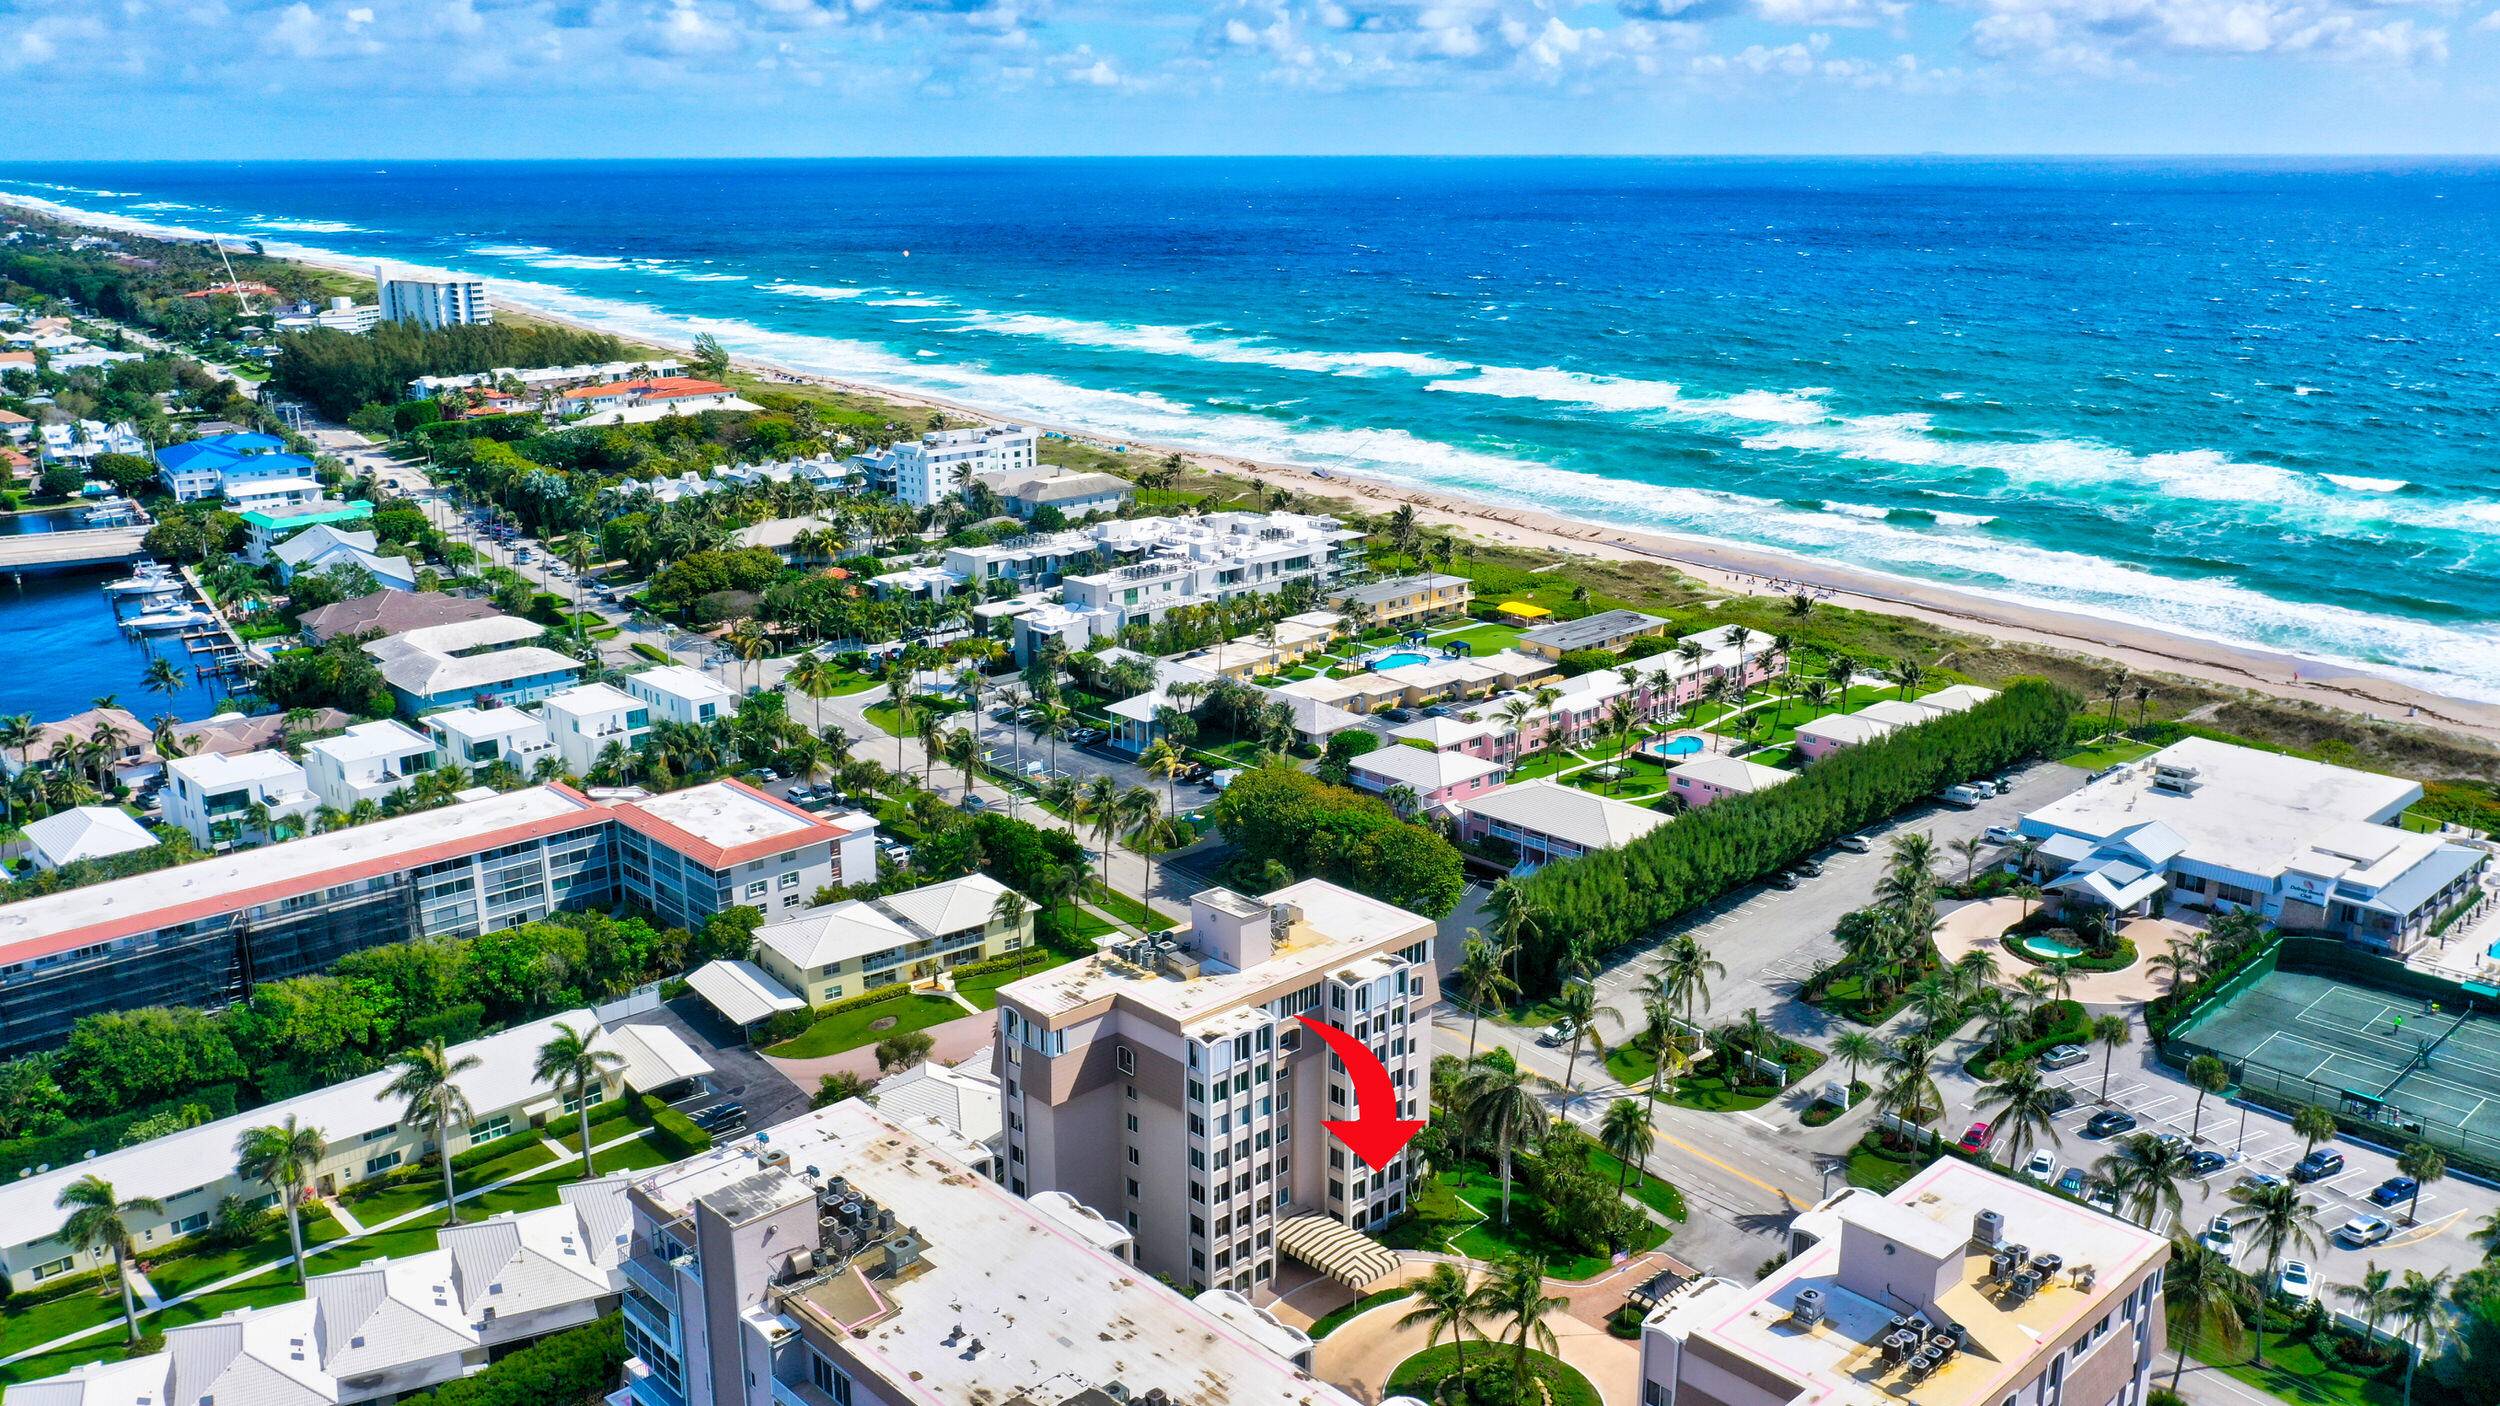 Welcome to Delray Beach Club Residences, a magnificent waterfront property nestled along the Intracoastal Waterway offering private deeded beach access across the street to the Atlantic Ocean in picturesque Delray ...